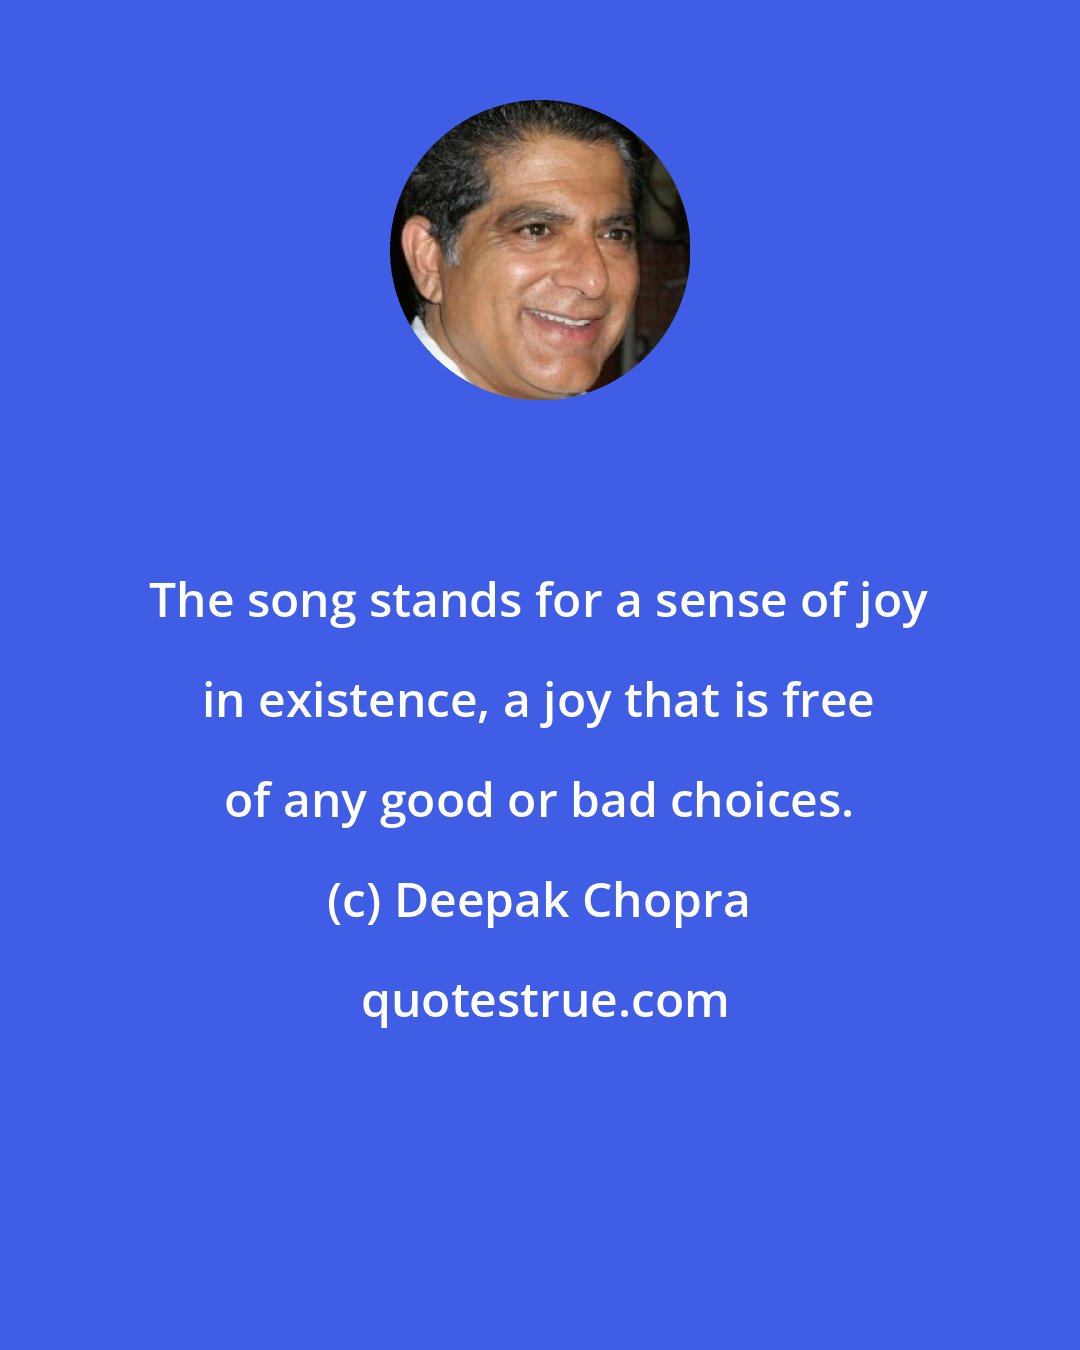 Deepak Chopra: The song stands for a sense of joy in existence, a joy that is free of any good or bad choices.